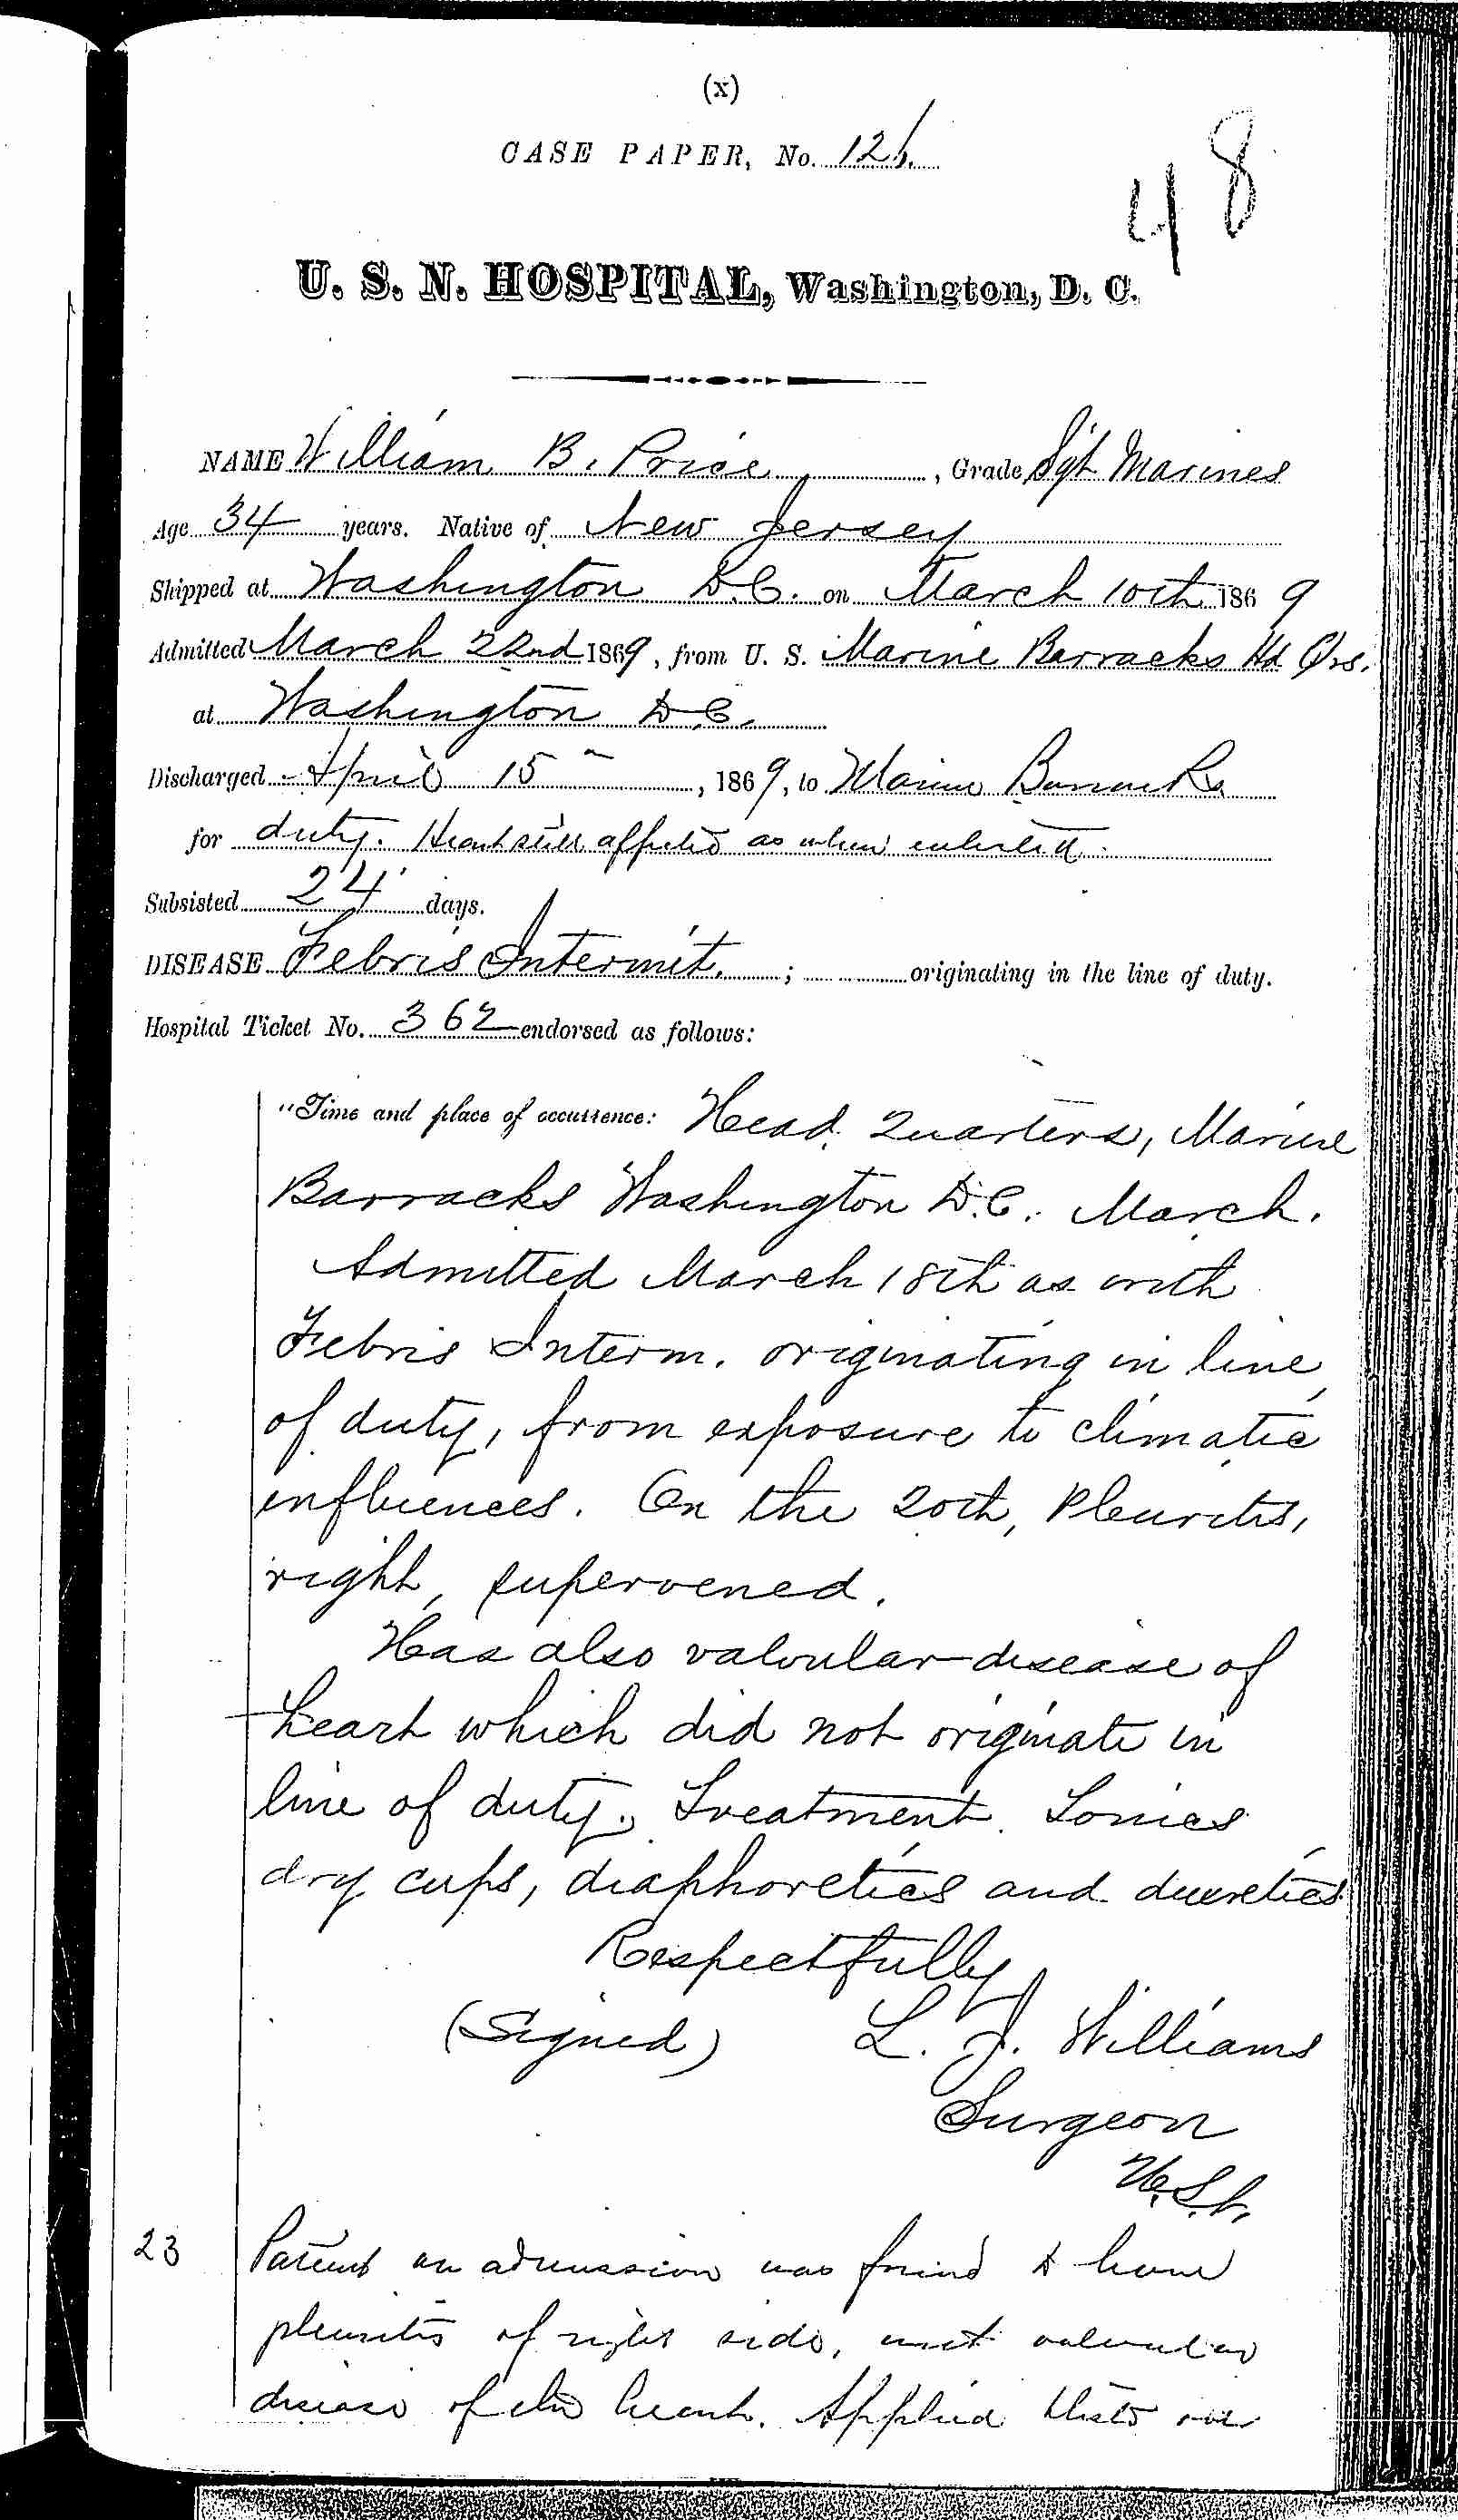 Entry for William B. Price (page 1 of 3) in the log Hospital Tickets and Case Papers - Naval Hospital - Washington, D.C. - 1868-69